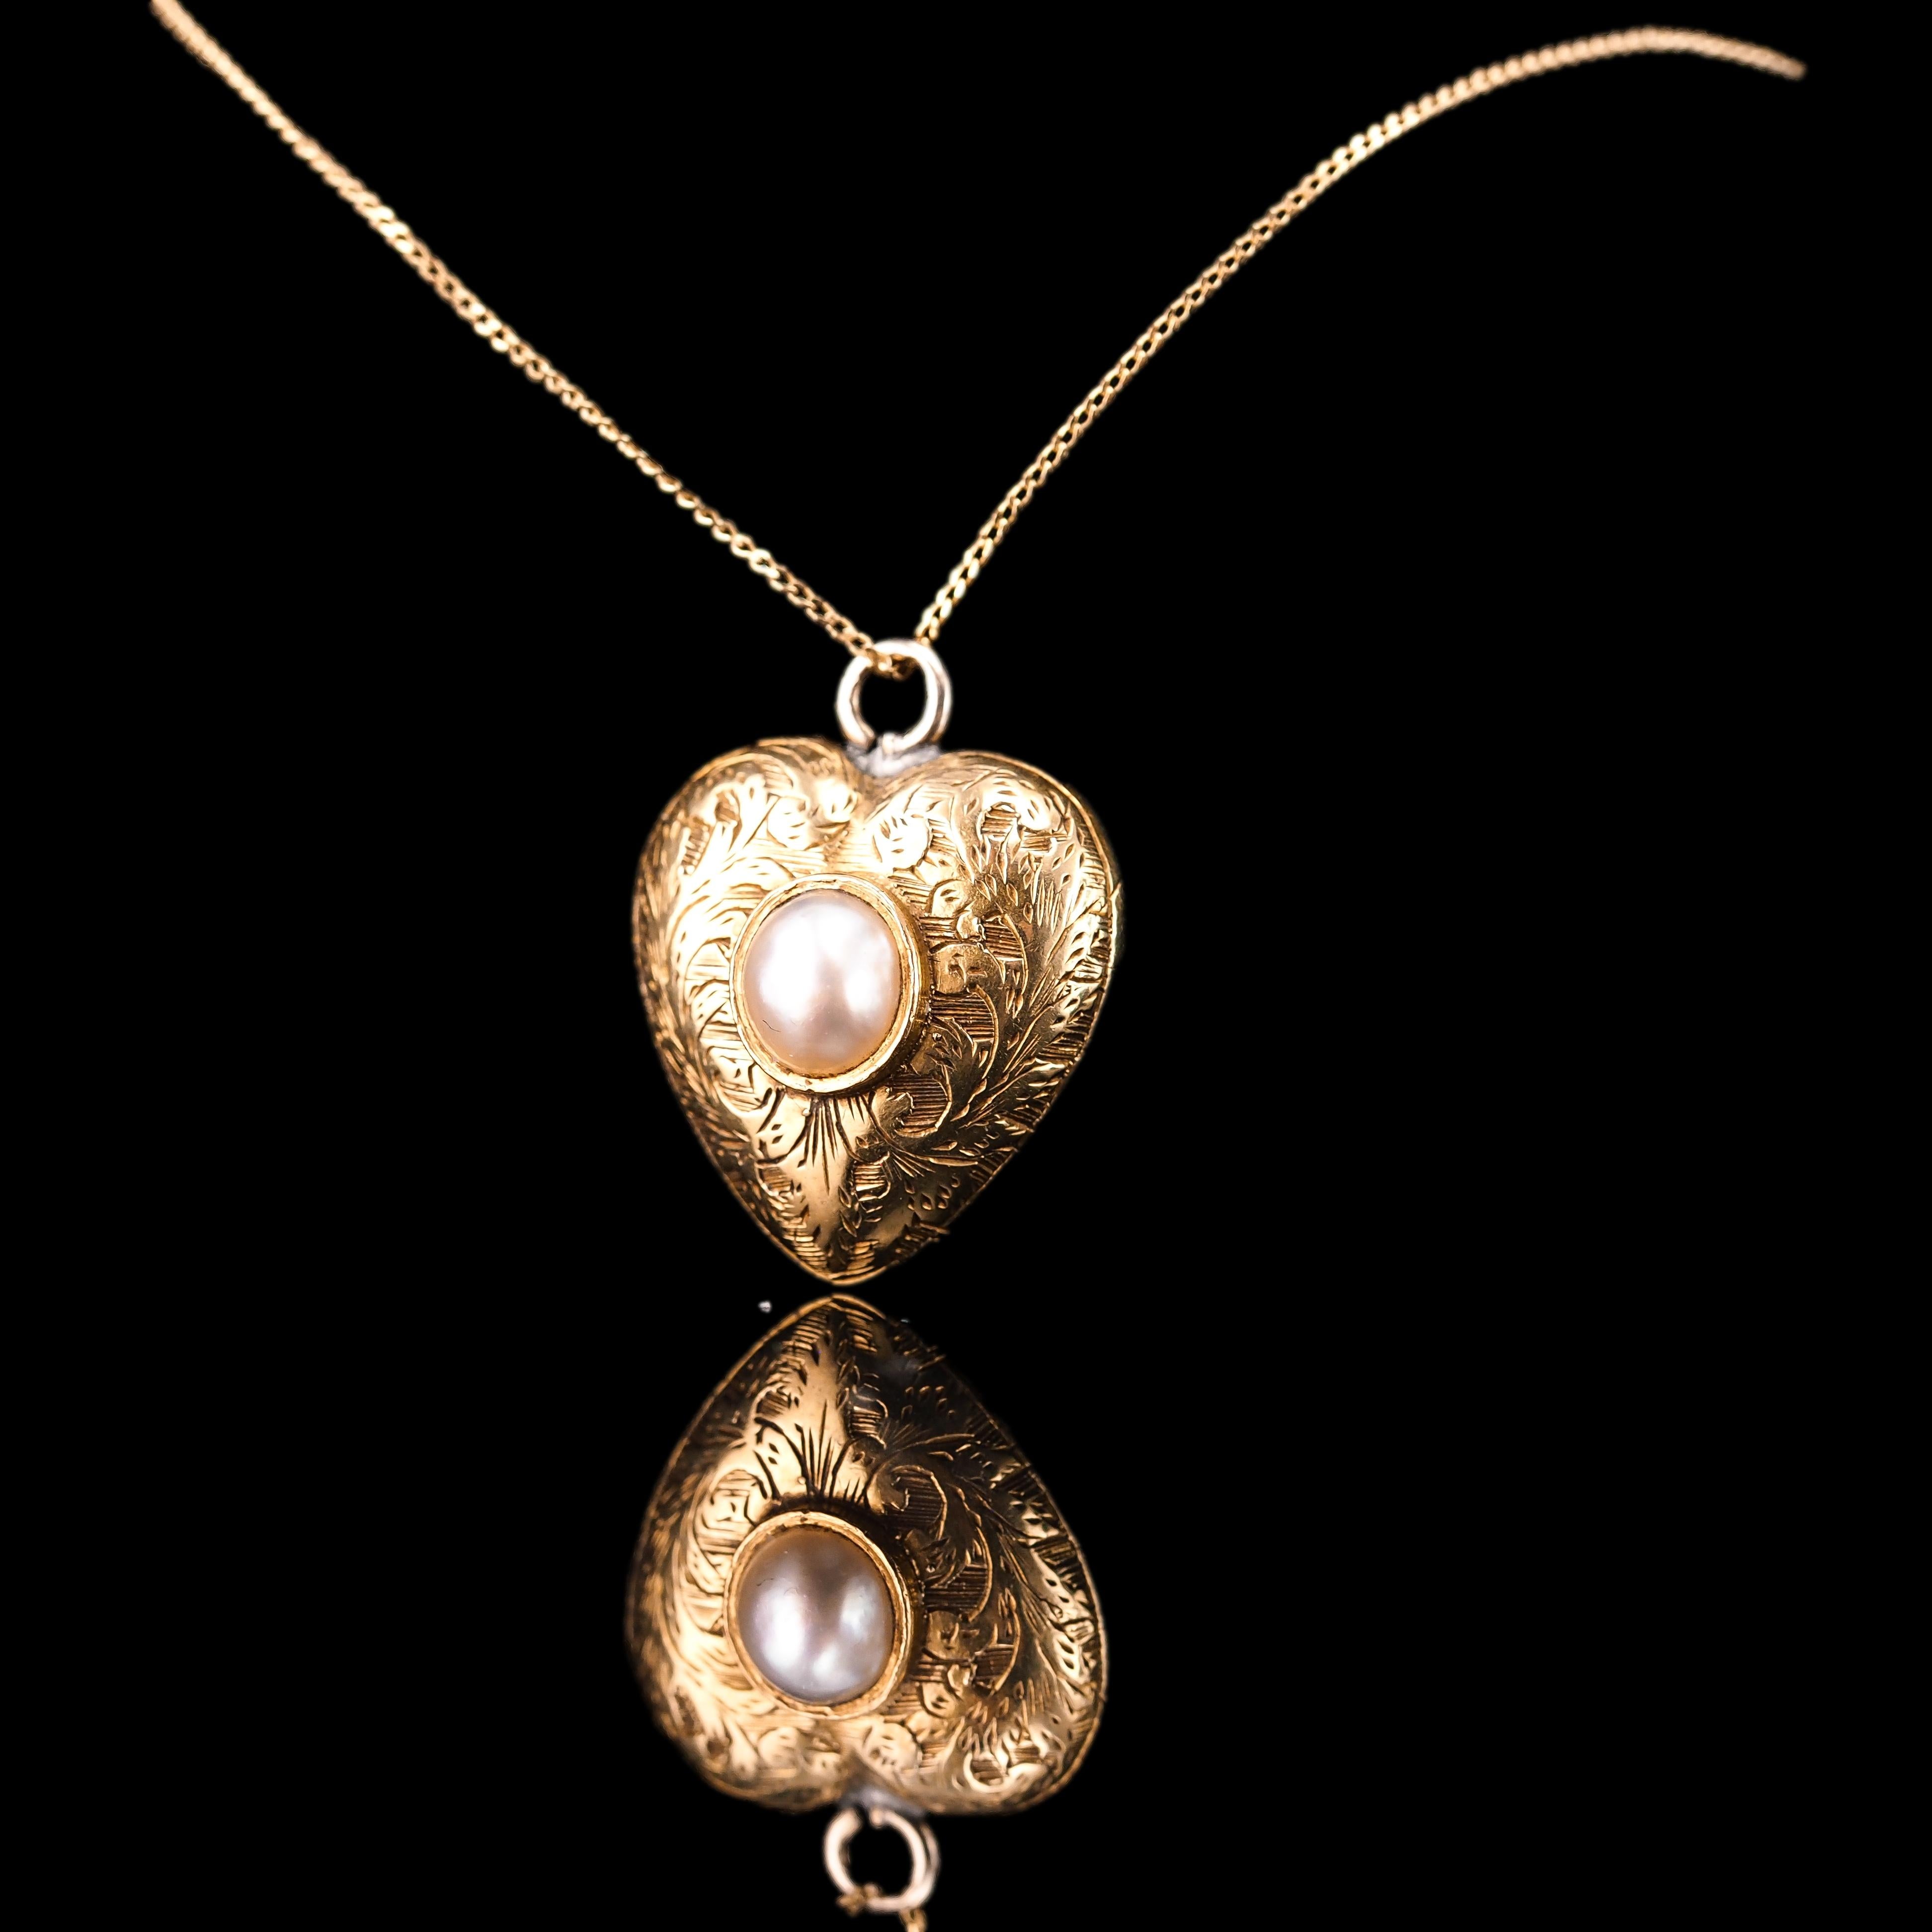 Antique 18K Gold Heart Charm Pendant Necklace with Pearl - Victorian c.1890 7